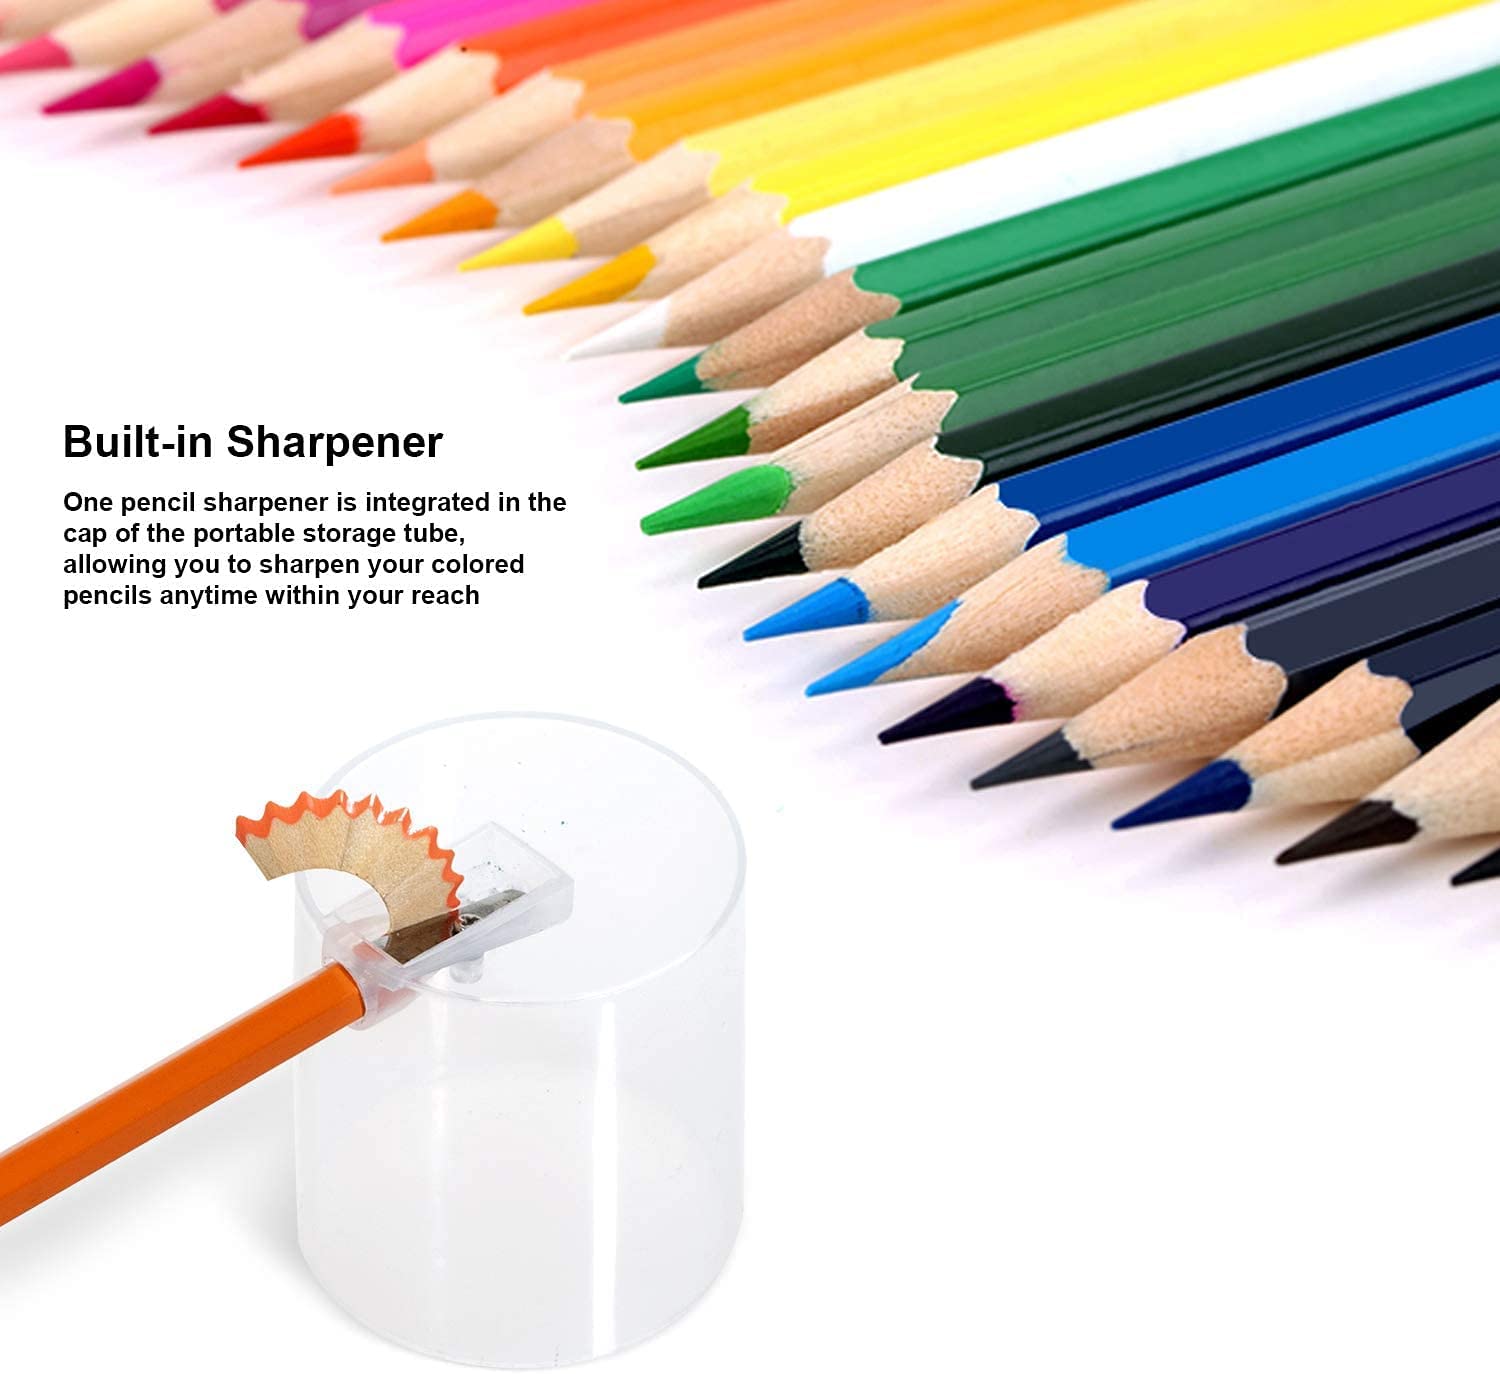 Deli 24 Colored Pencils Set, Coloring Pencils with Sharpener for Drawing,  Painting and Sketching, Pre-sharpened Vibrant Pencils with Storage Tube,  Easy to Color Books for Students, Teachers, Adults 